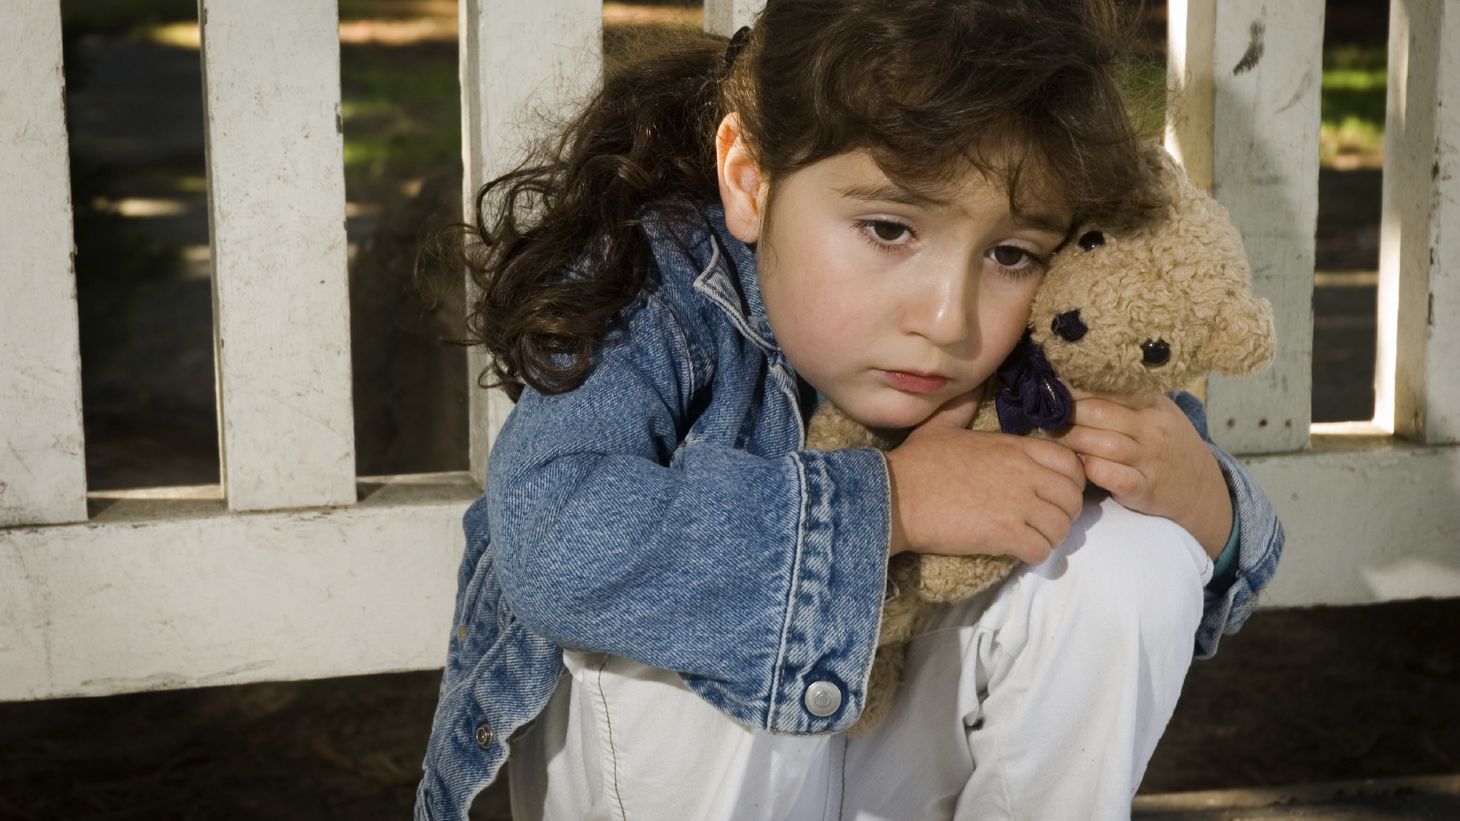 Young child holding a teddy bear and looking sad